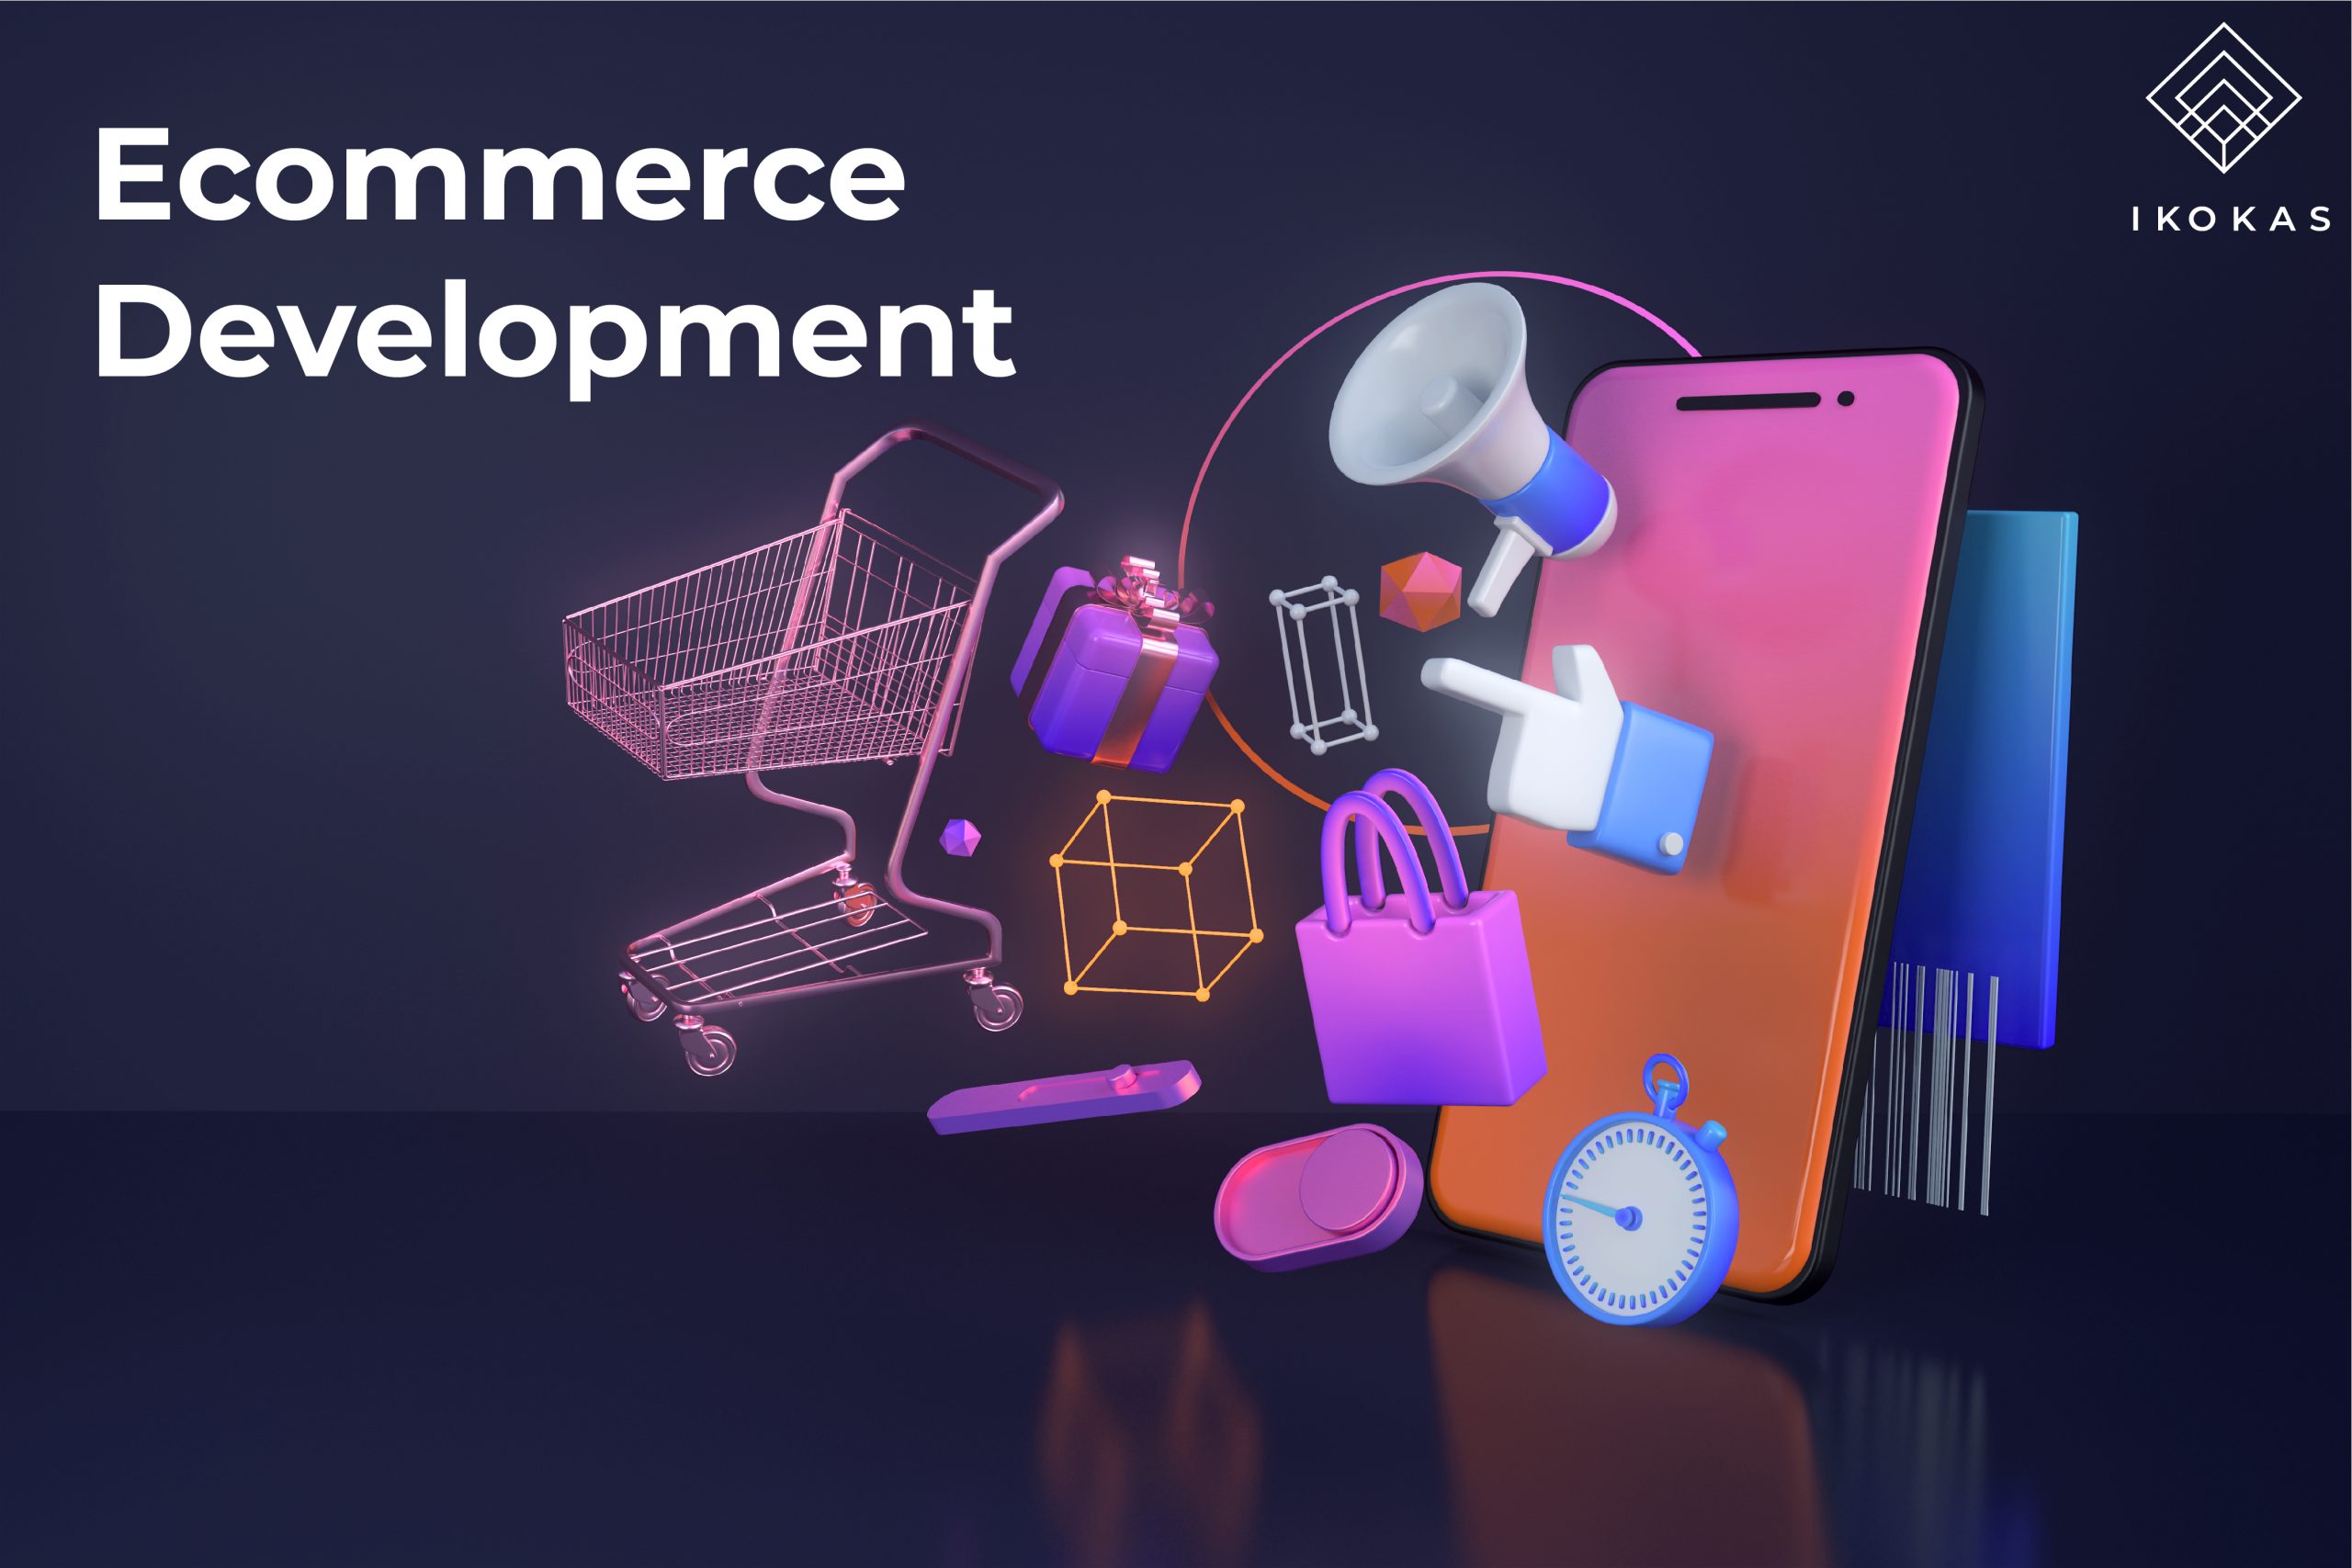 How eCommerce Will Help You Get More Business